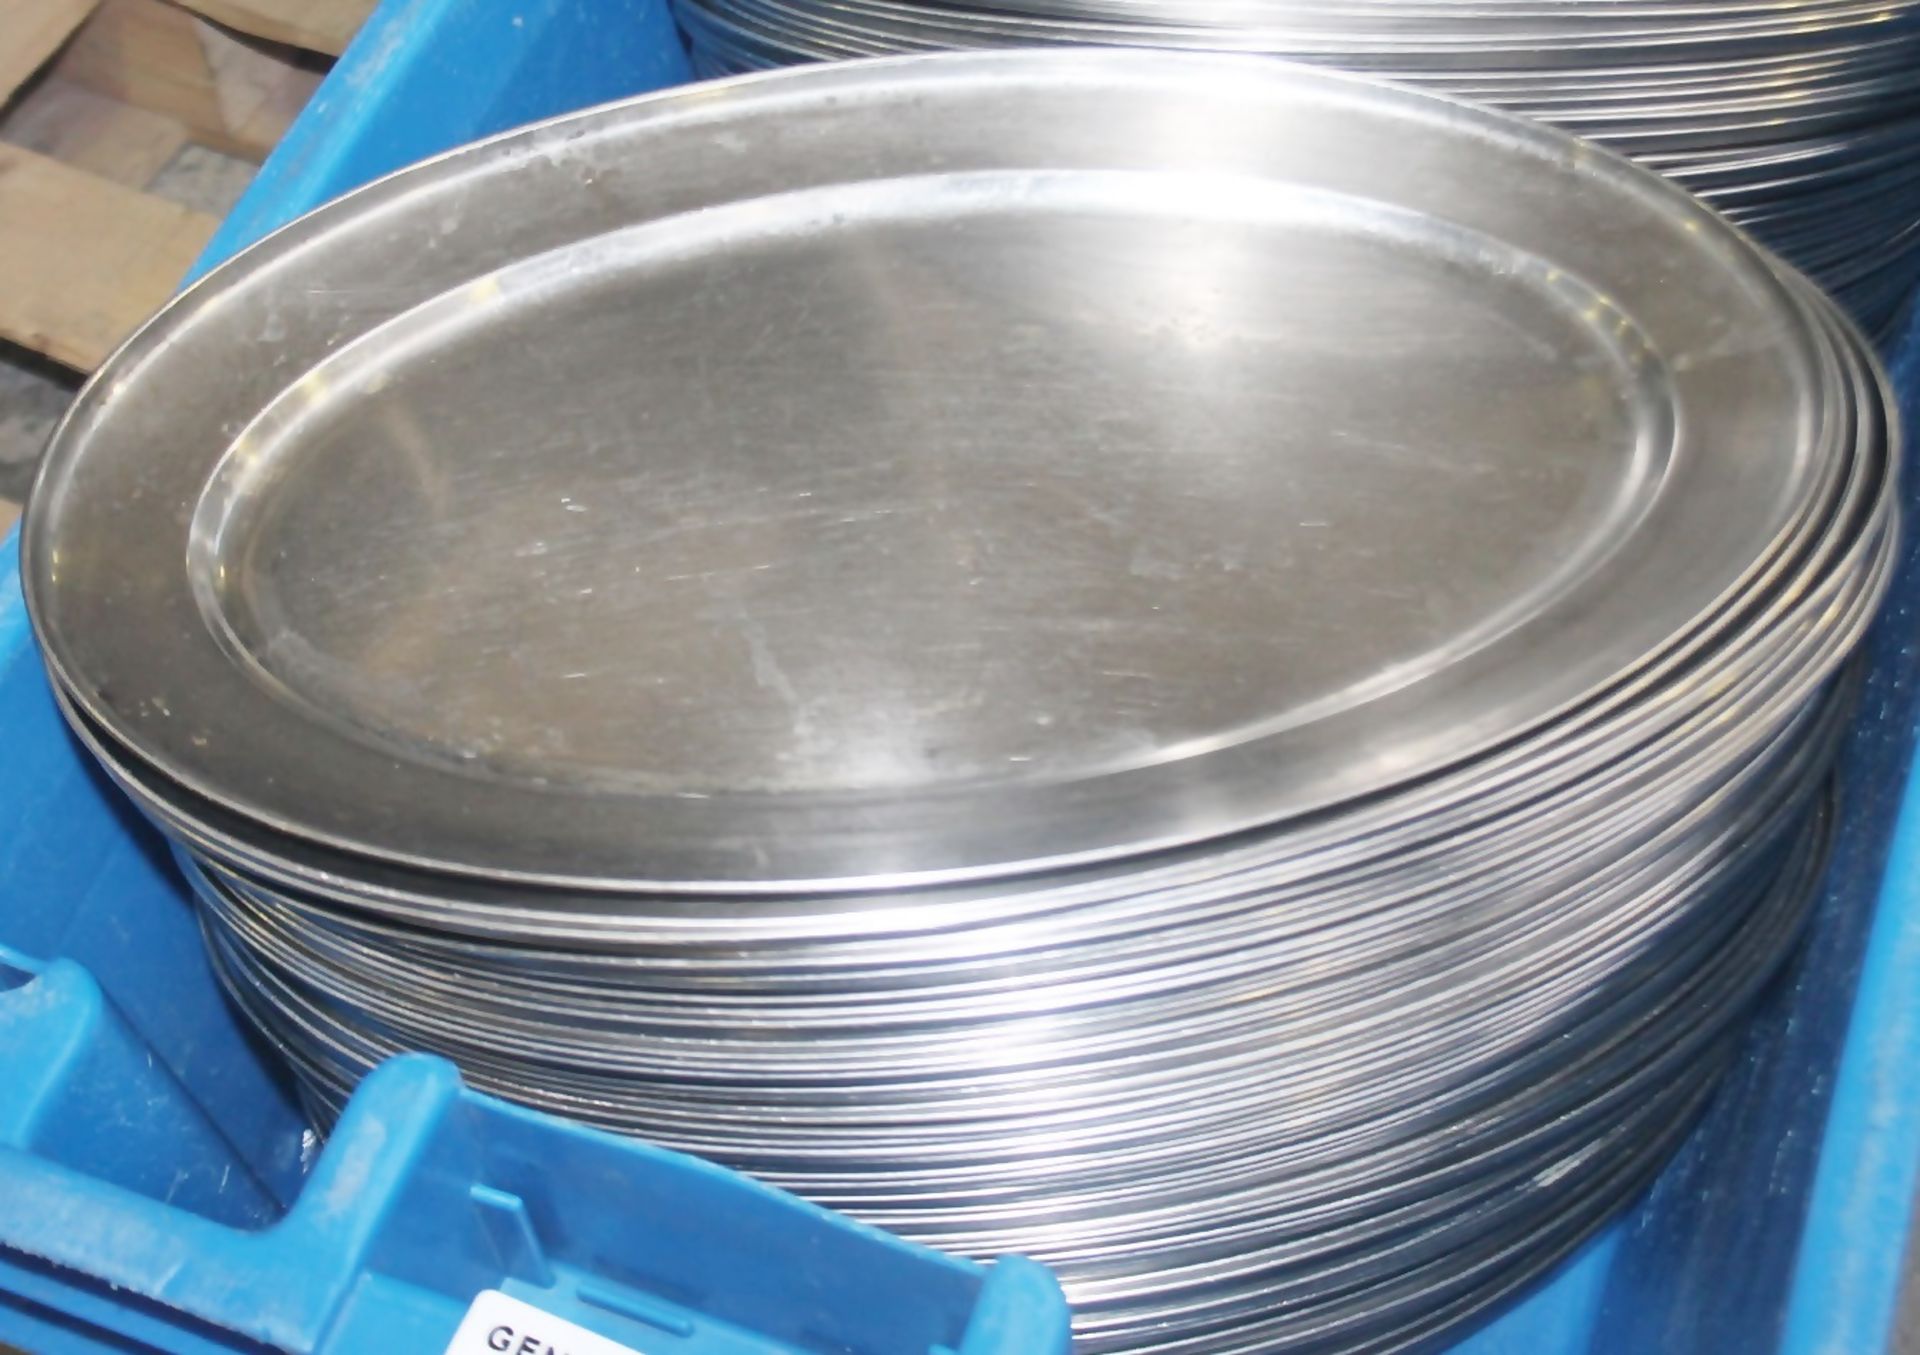 50 x Stainless Steel Oval Restaurant Serving Tray Platters - Dimensions (approx): 45 x 29cm - - Image 2 of 4